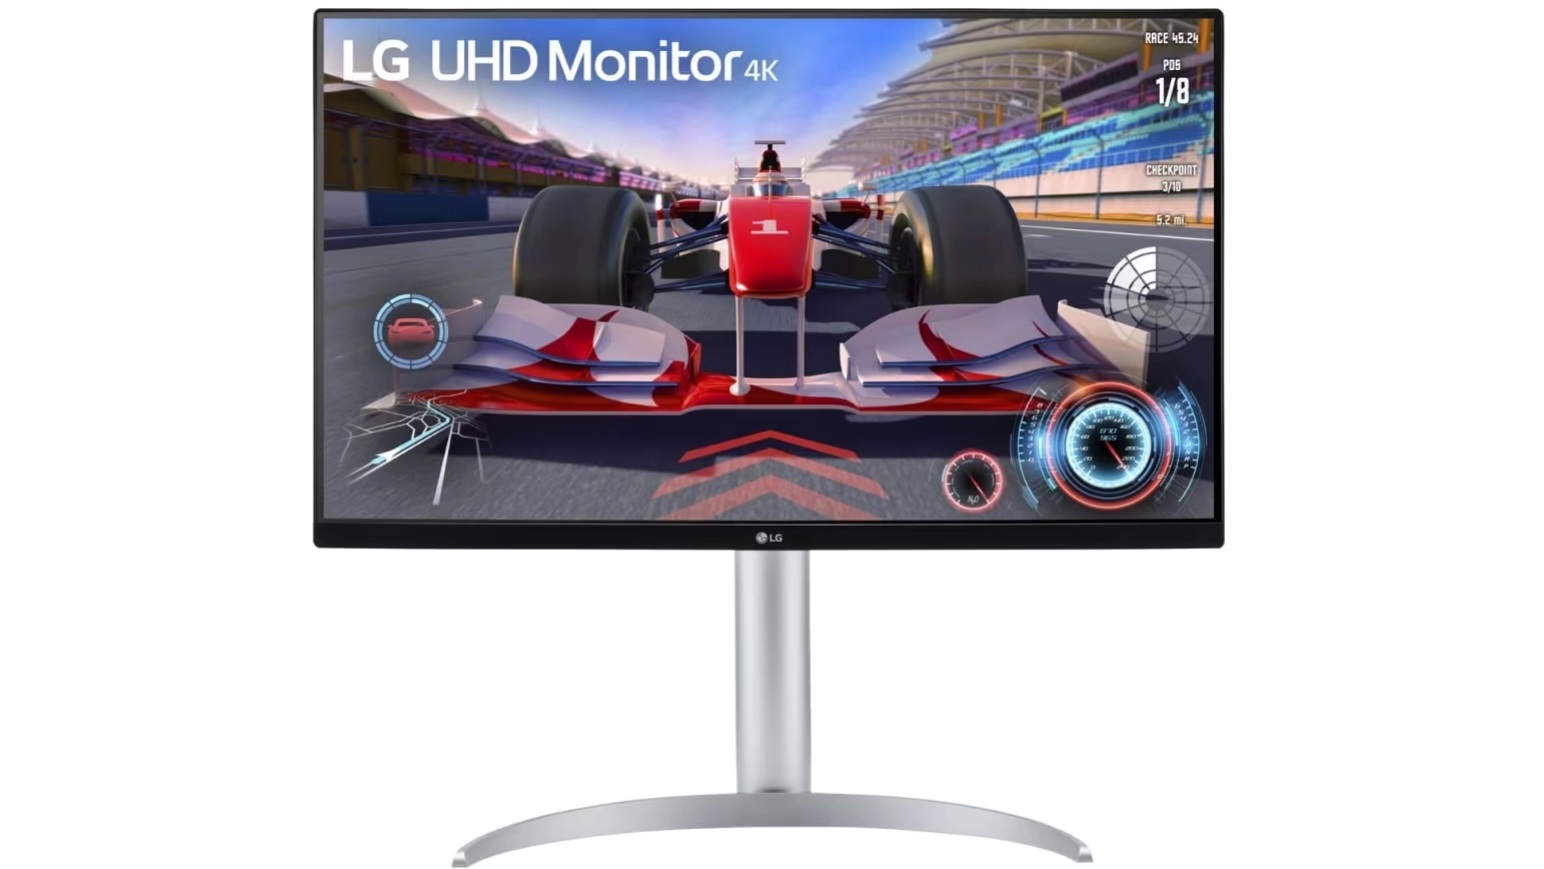 LG announced a 4K gaming monitor with 144Hz frame rate, HDMI 2.1 and DisplayPort 1.4